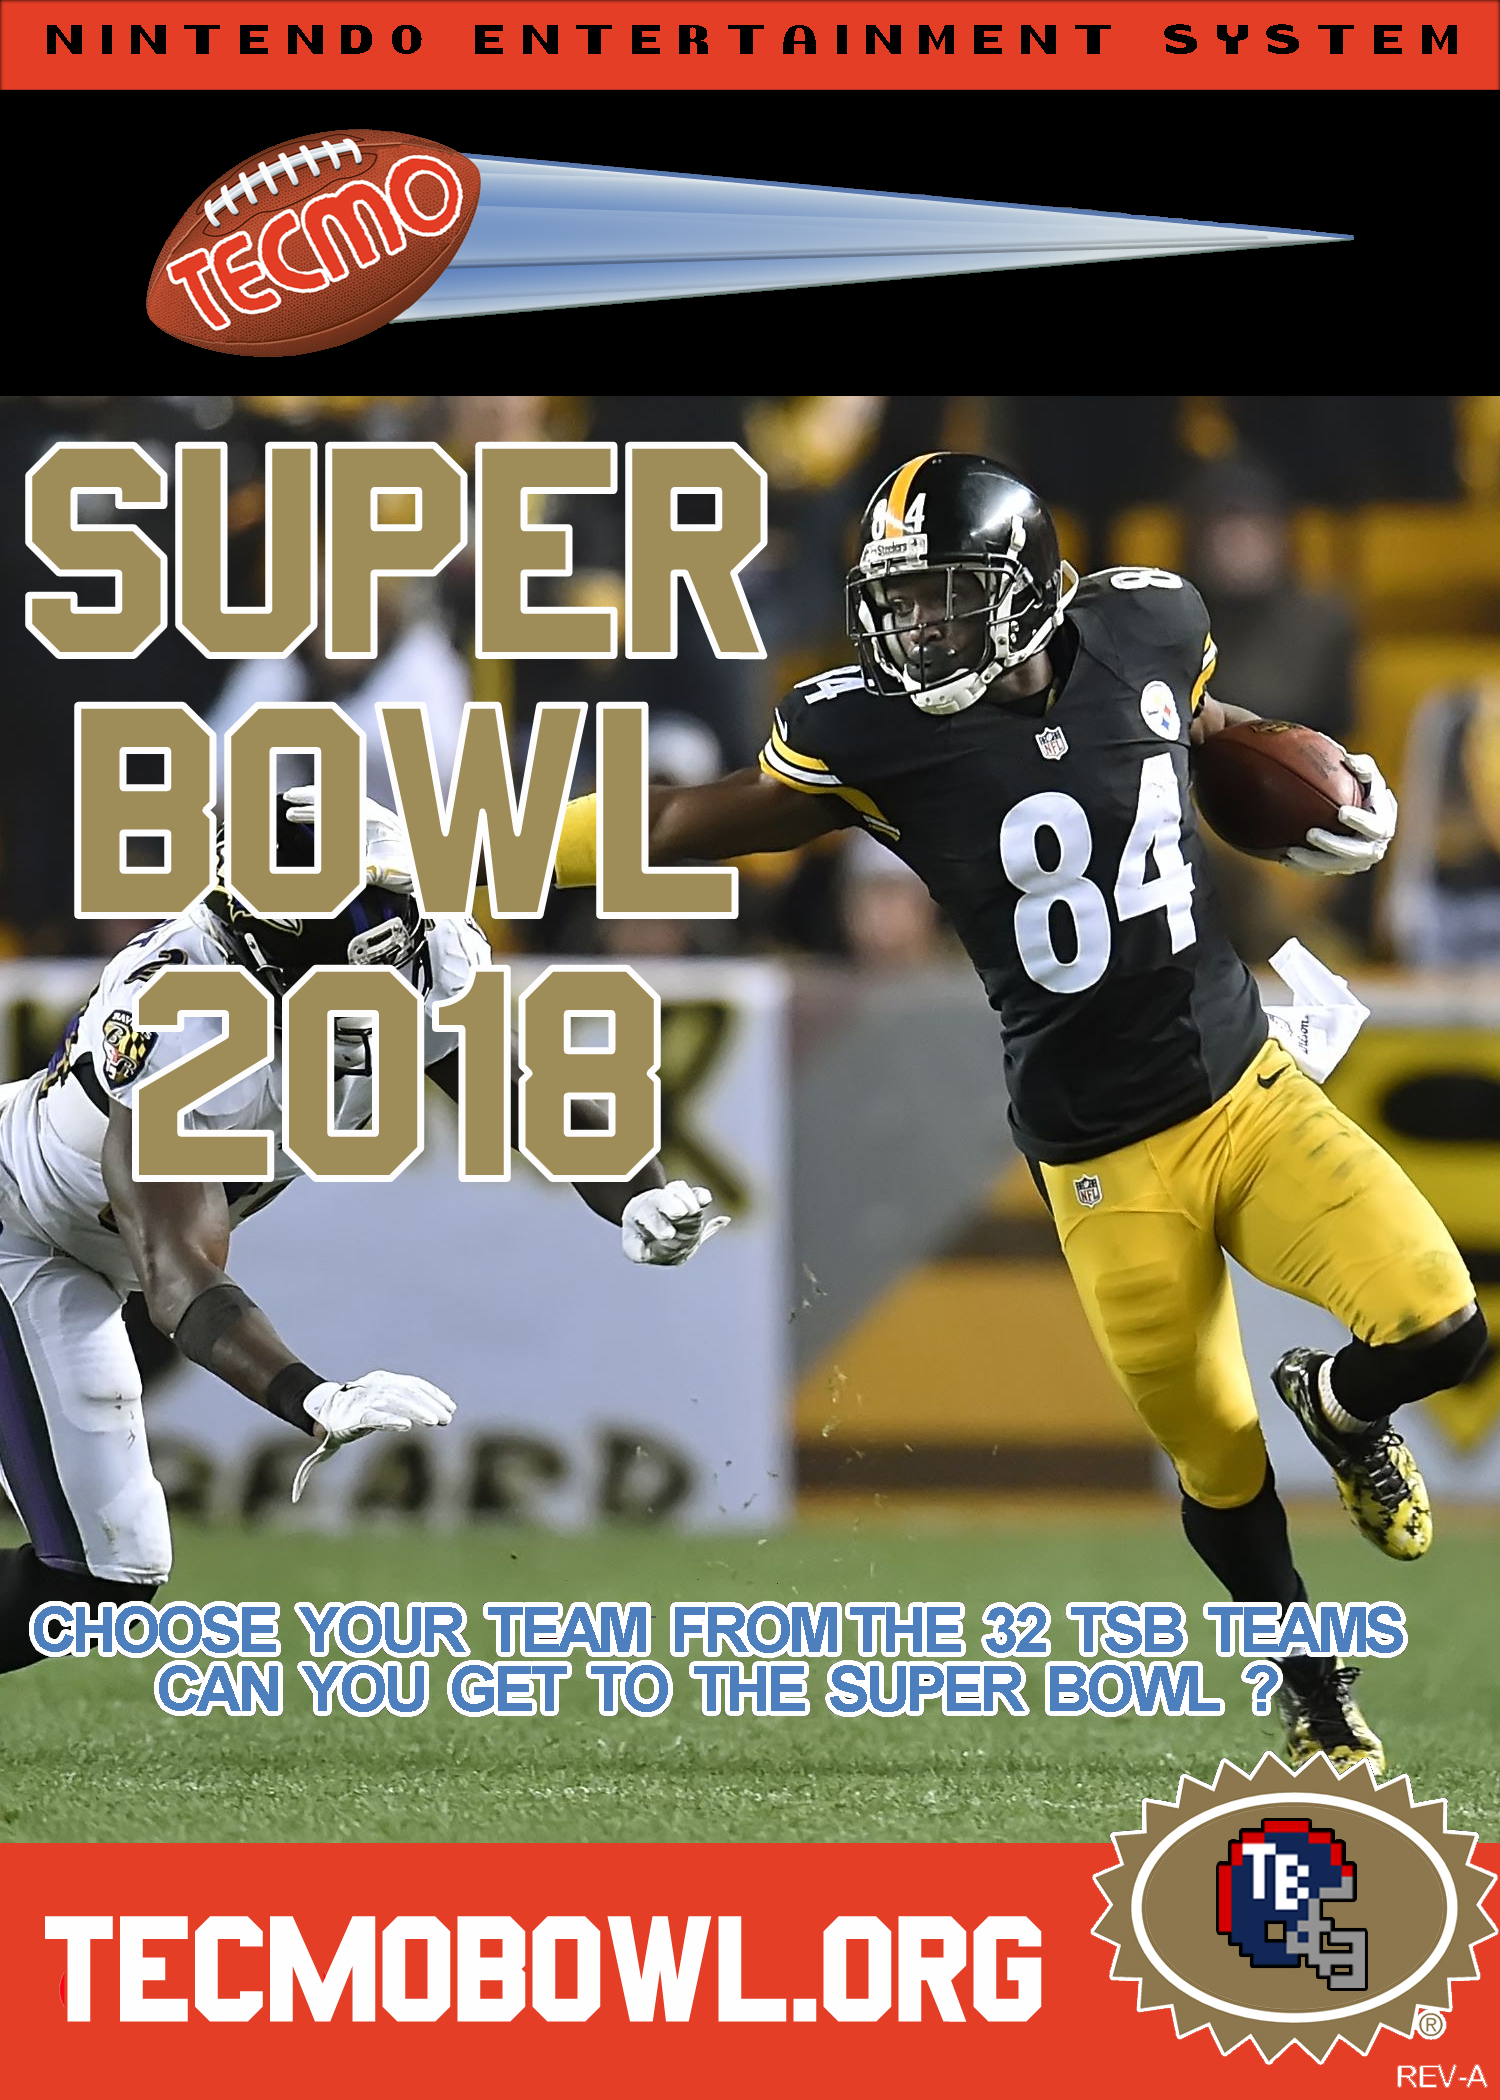 (NES) Tecmo Super Bowl 2018 Presented by TecmoBowl.org - Download Support - TecmoBowl.org